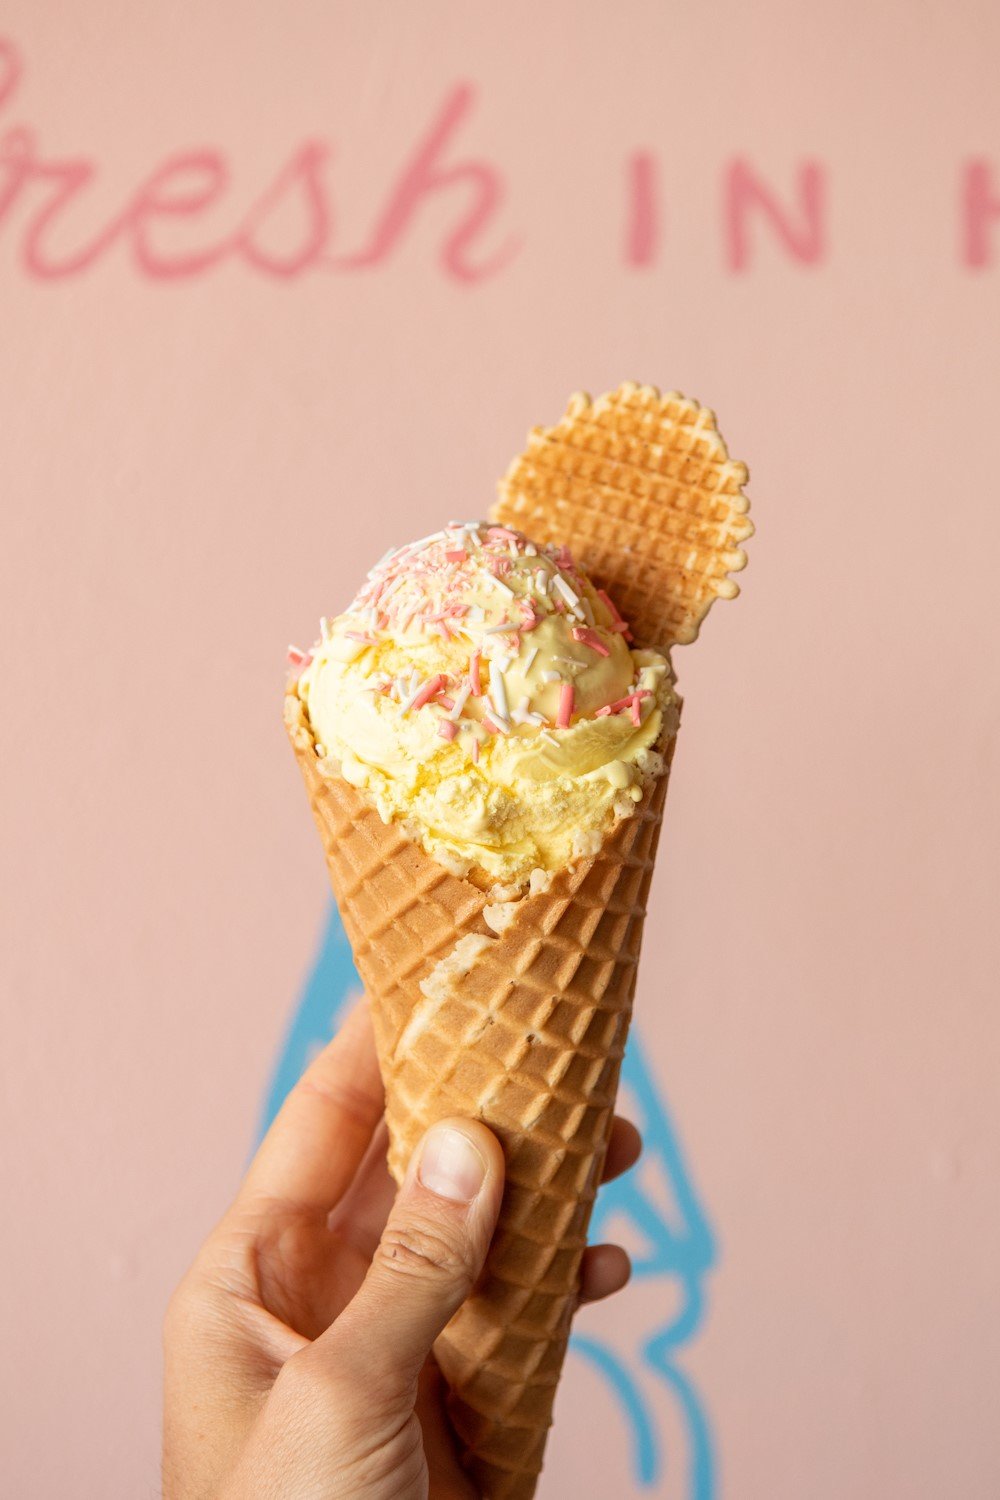 Mayday Handcrafted Ice Creams offers a wide variety of flavors.